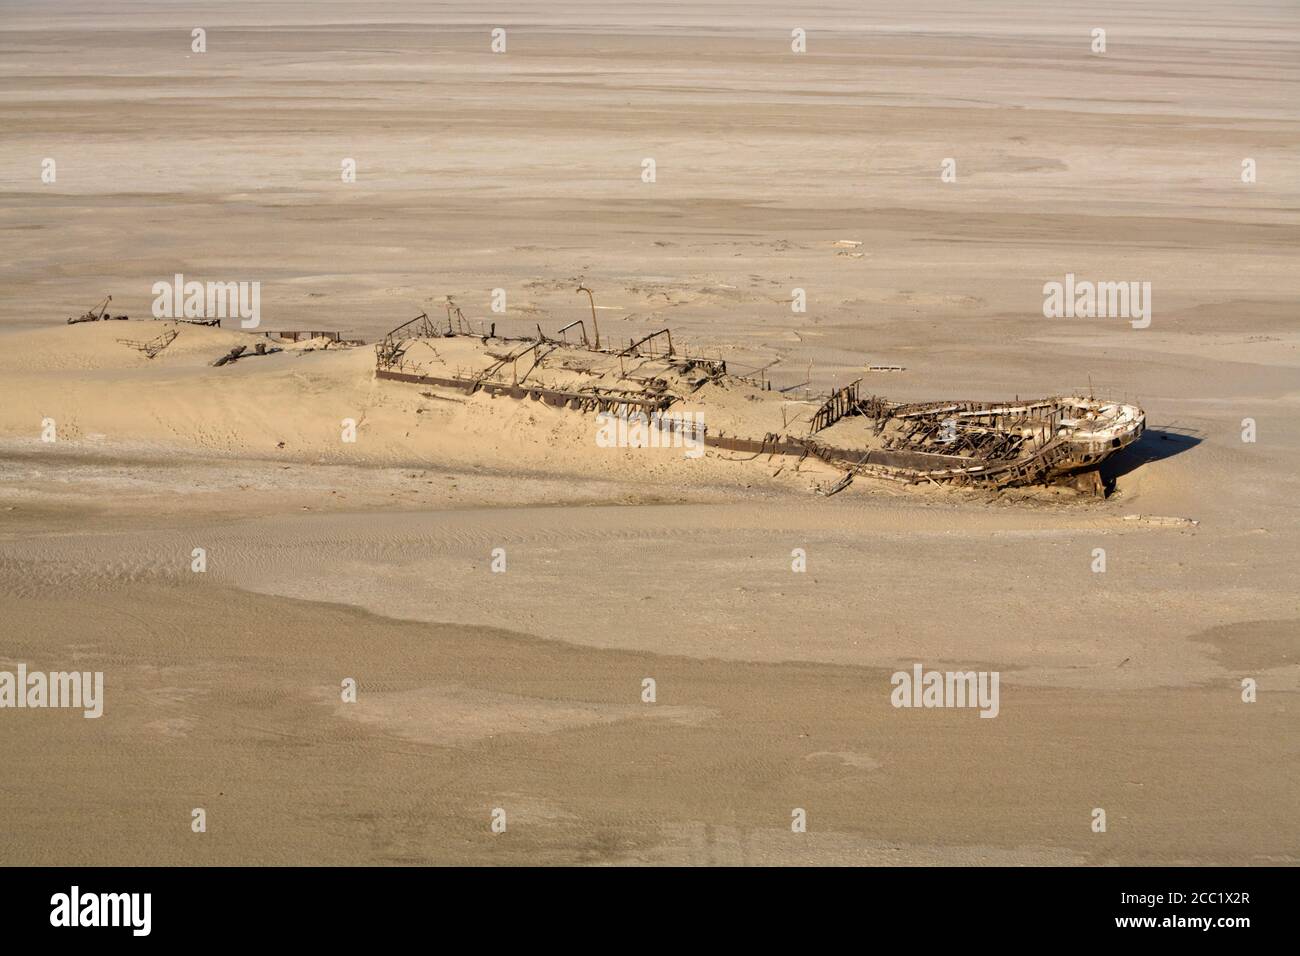 Africa, Namibia, Skeleton Coast, Eduard Bohlen, shipwrecked in 1909, buried in sand, aerial view Stock Photo